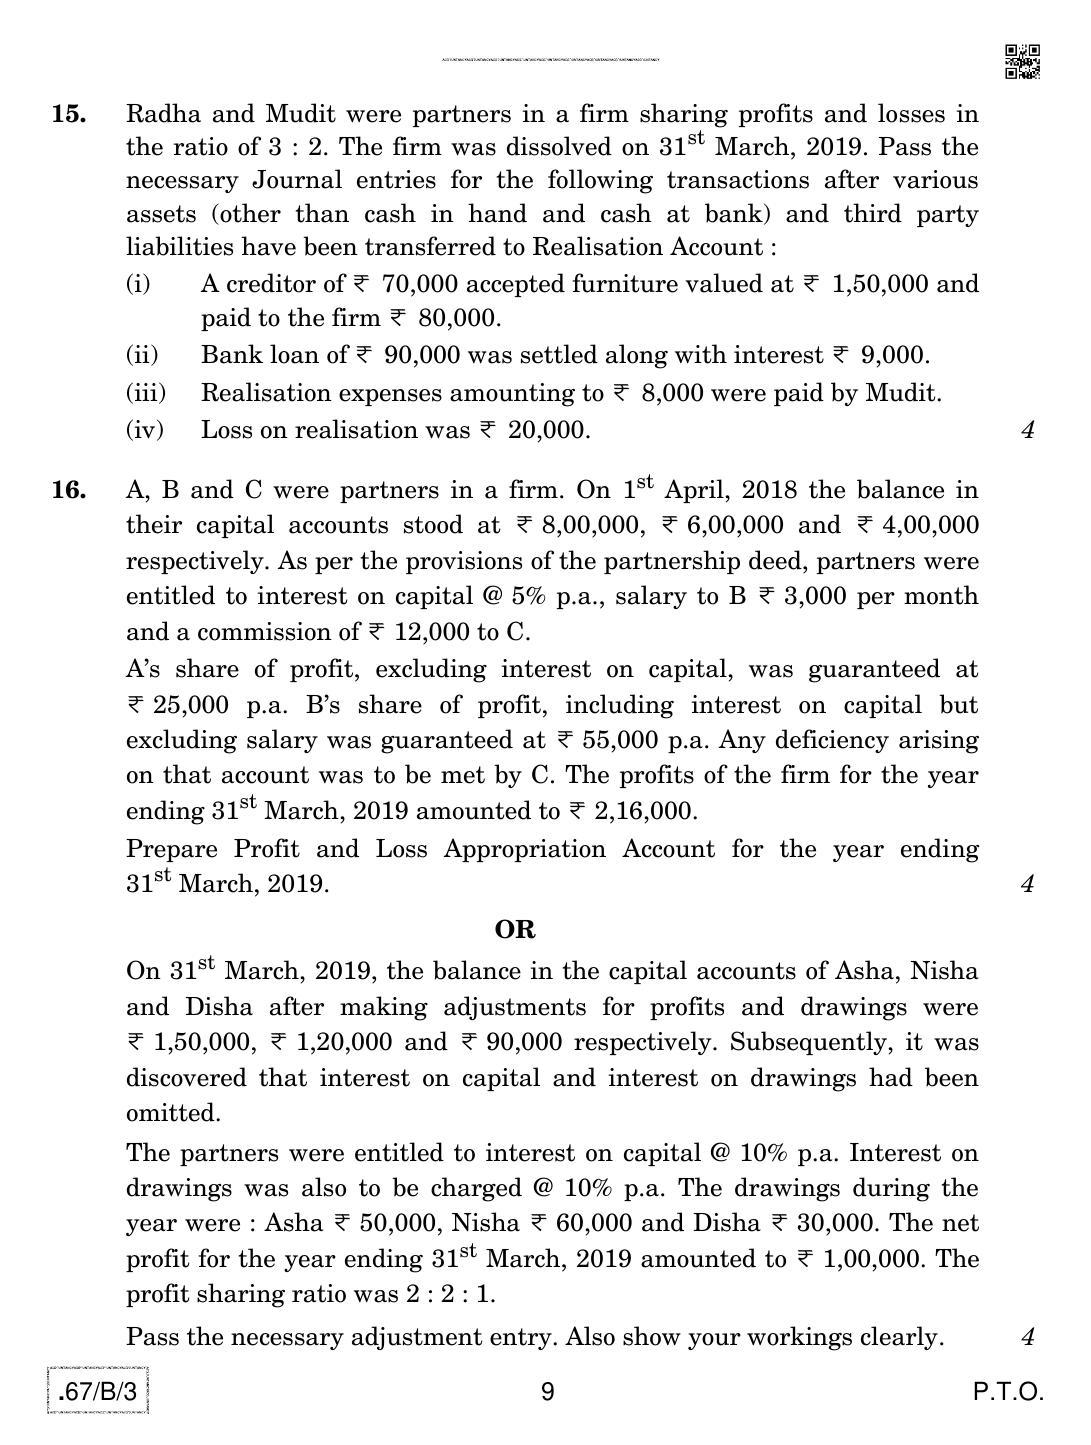 CBSE Class 12 67-C-3 - Accountancy 2020 Compartment Question Paper - Page 9